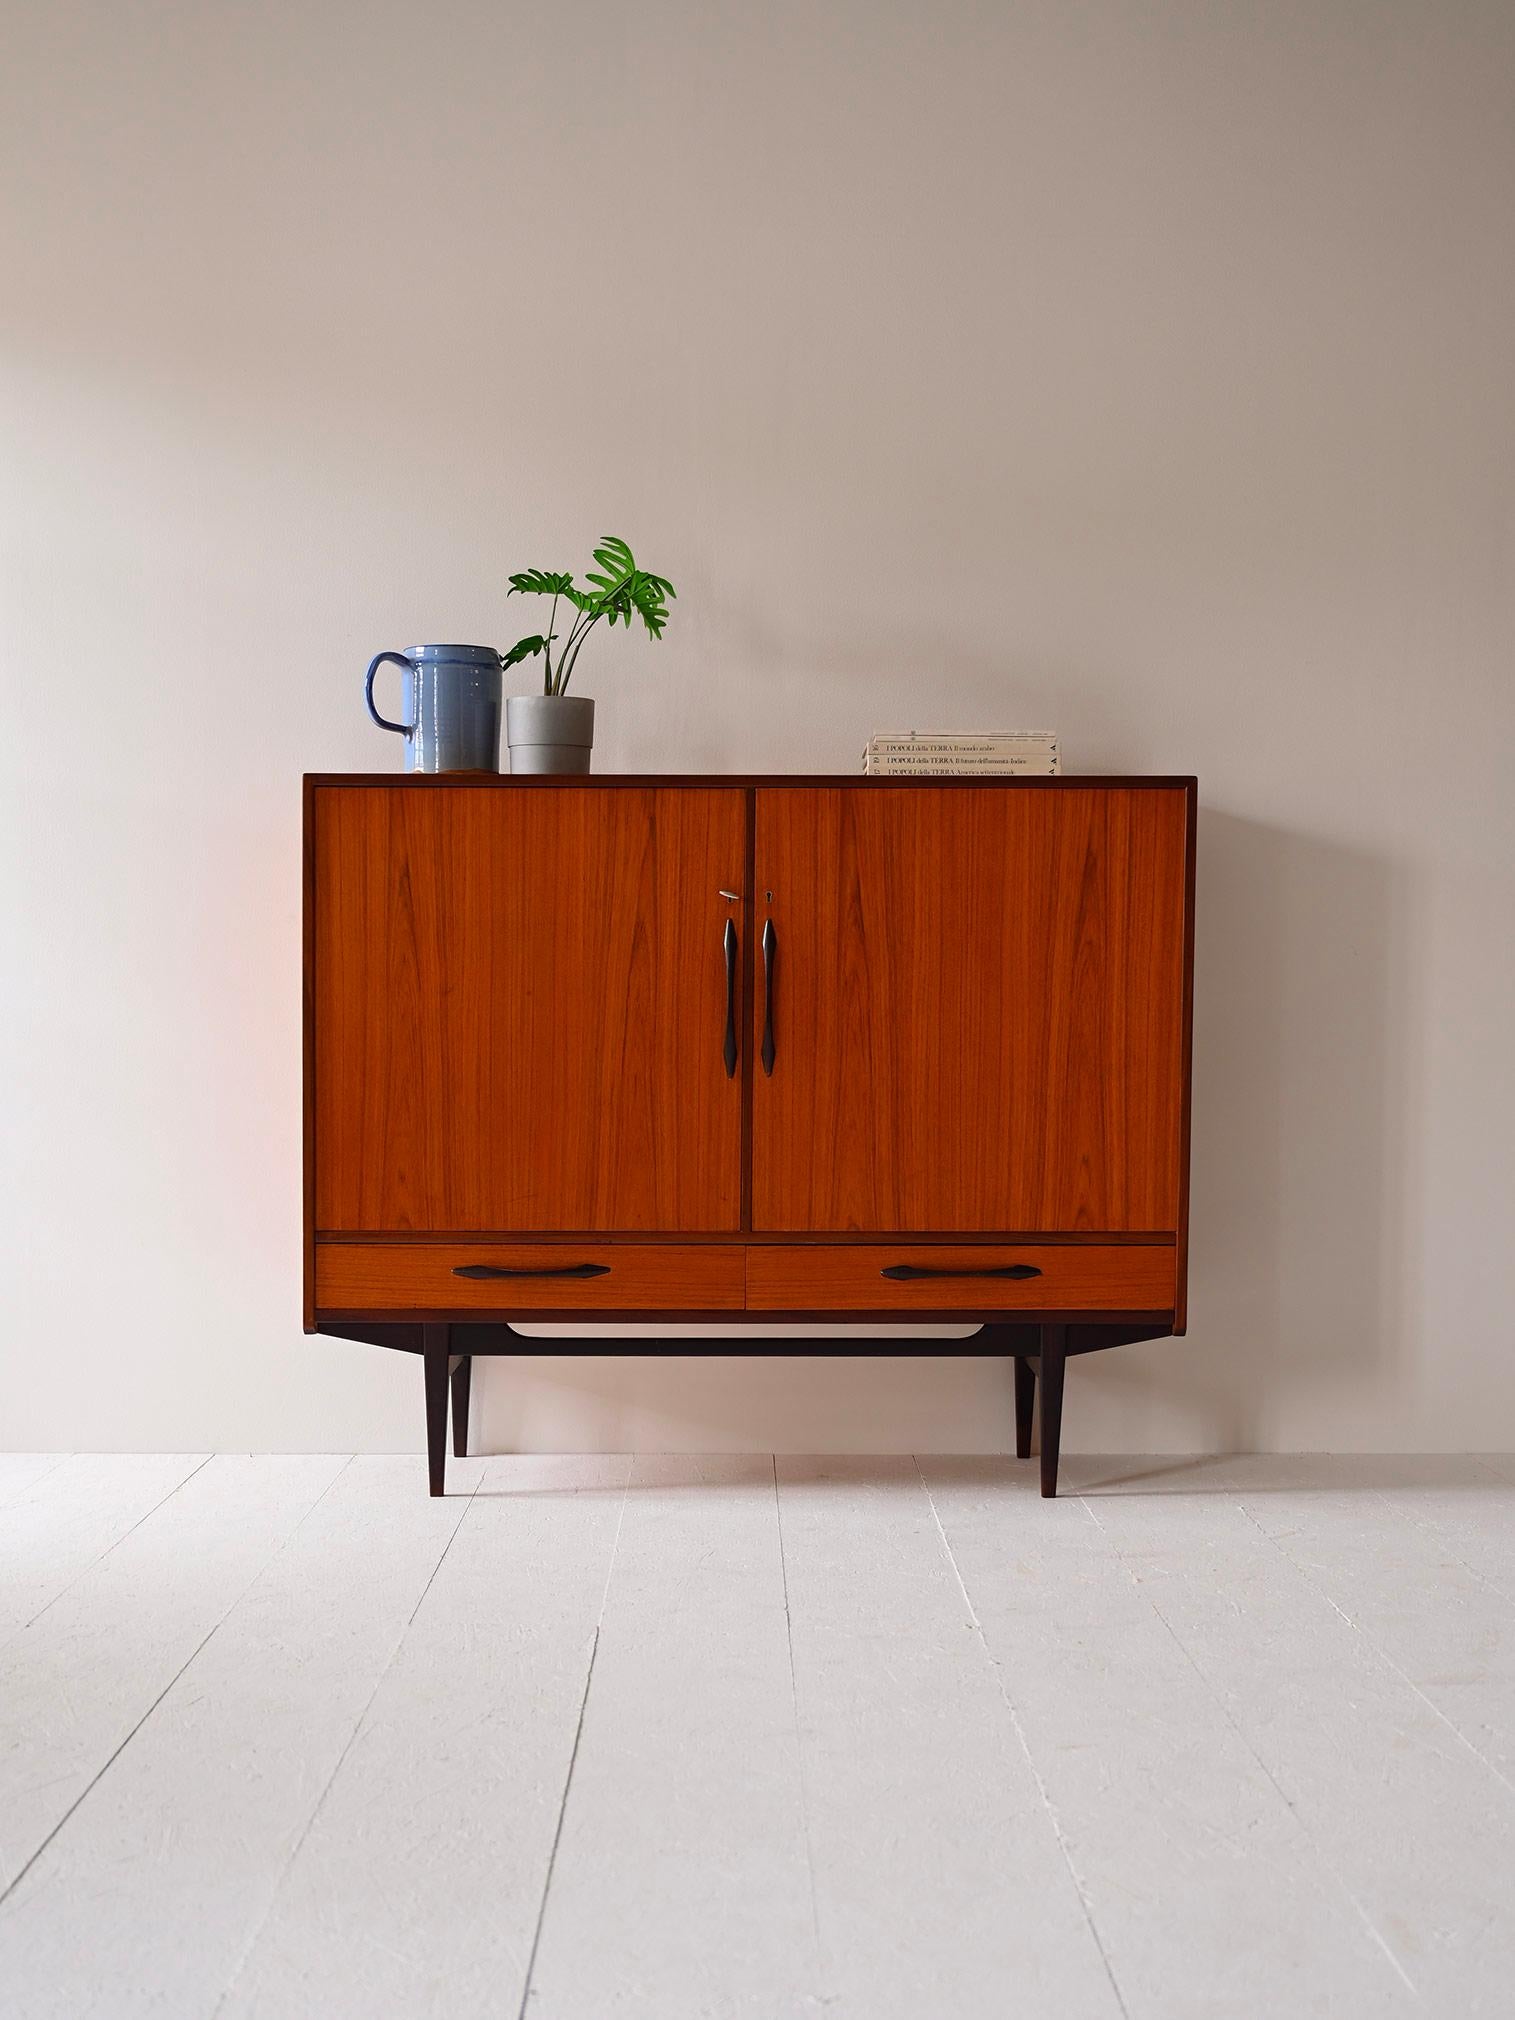 Scandinavian teak sideboard from the 1960s.

This simple yet highly sought-after piece of furniture encapsulates the Nordic tradition for design with essential lines and timeless beauty.
Consisting of two compartments equipped with shelves and